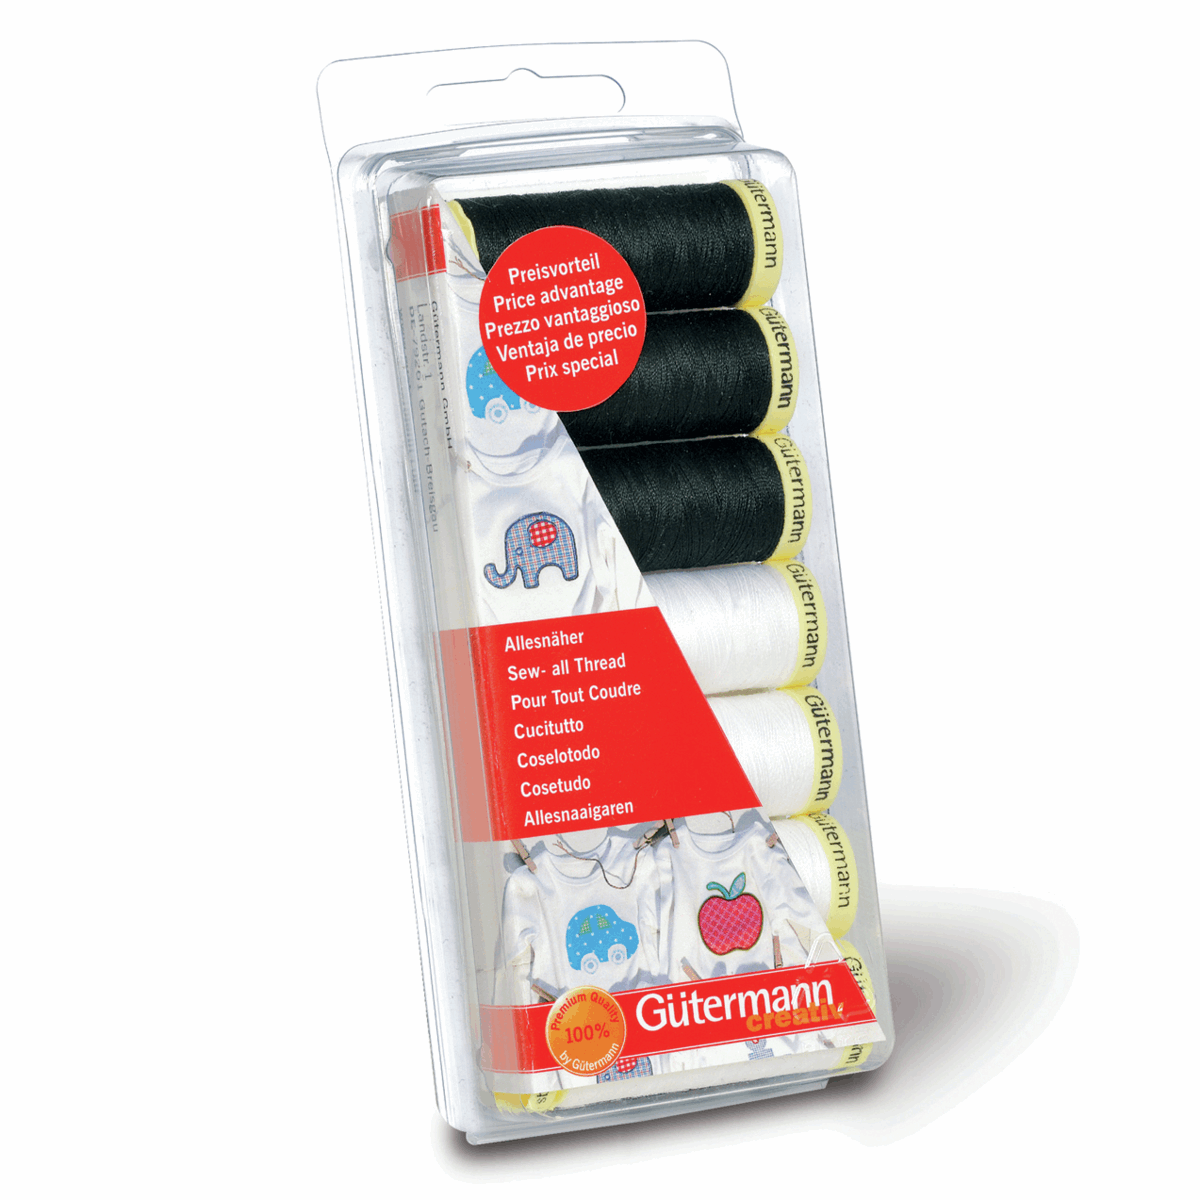 Gutermann Sew-all Thread - Black and White 7 Pack